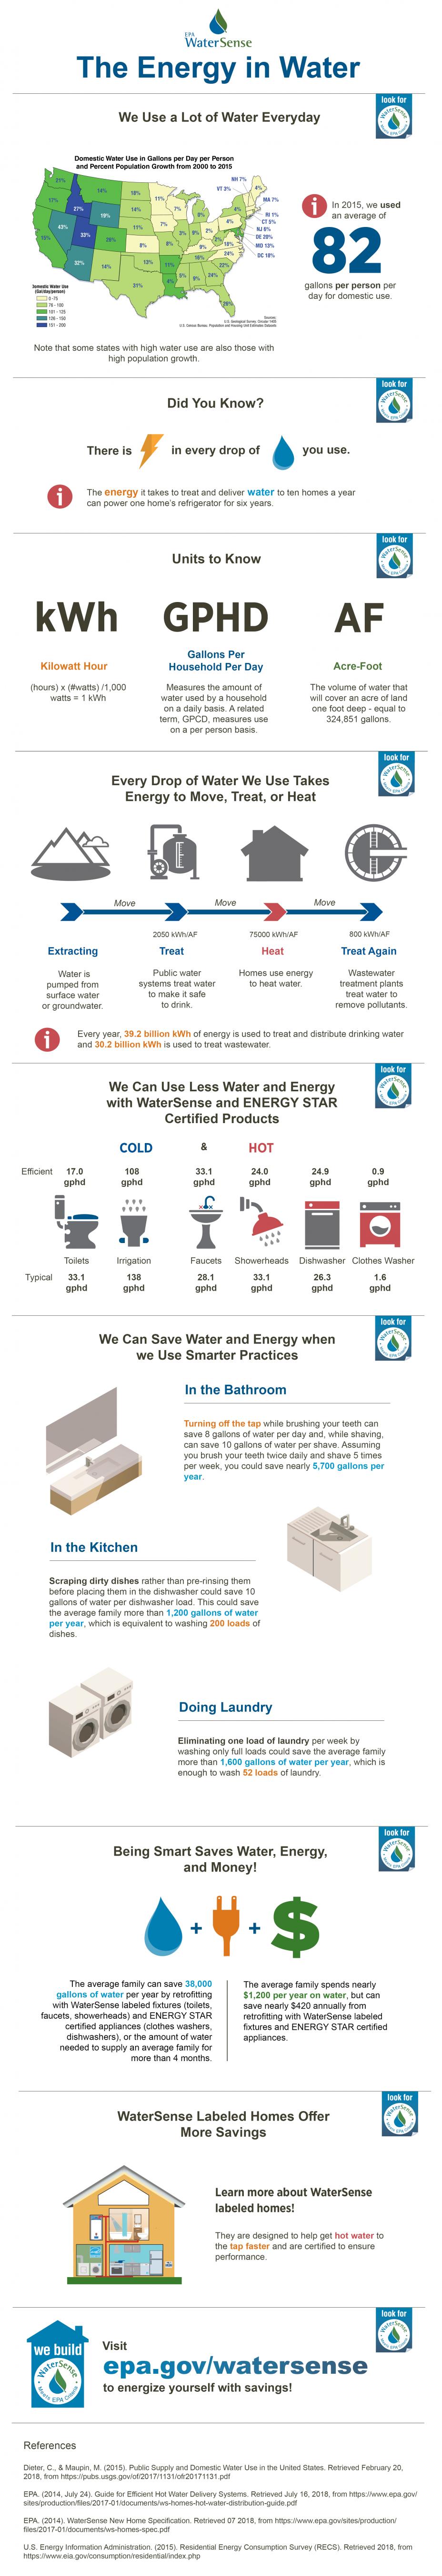 A lot of energy is used to carry every gallon of water you use from a drinking water source to a treatment plant that makes it safe to drink. After water leaves the treatment plant, more energy is needed to carry it through water pipes to your house.